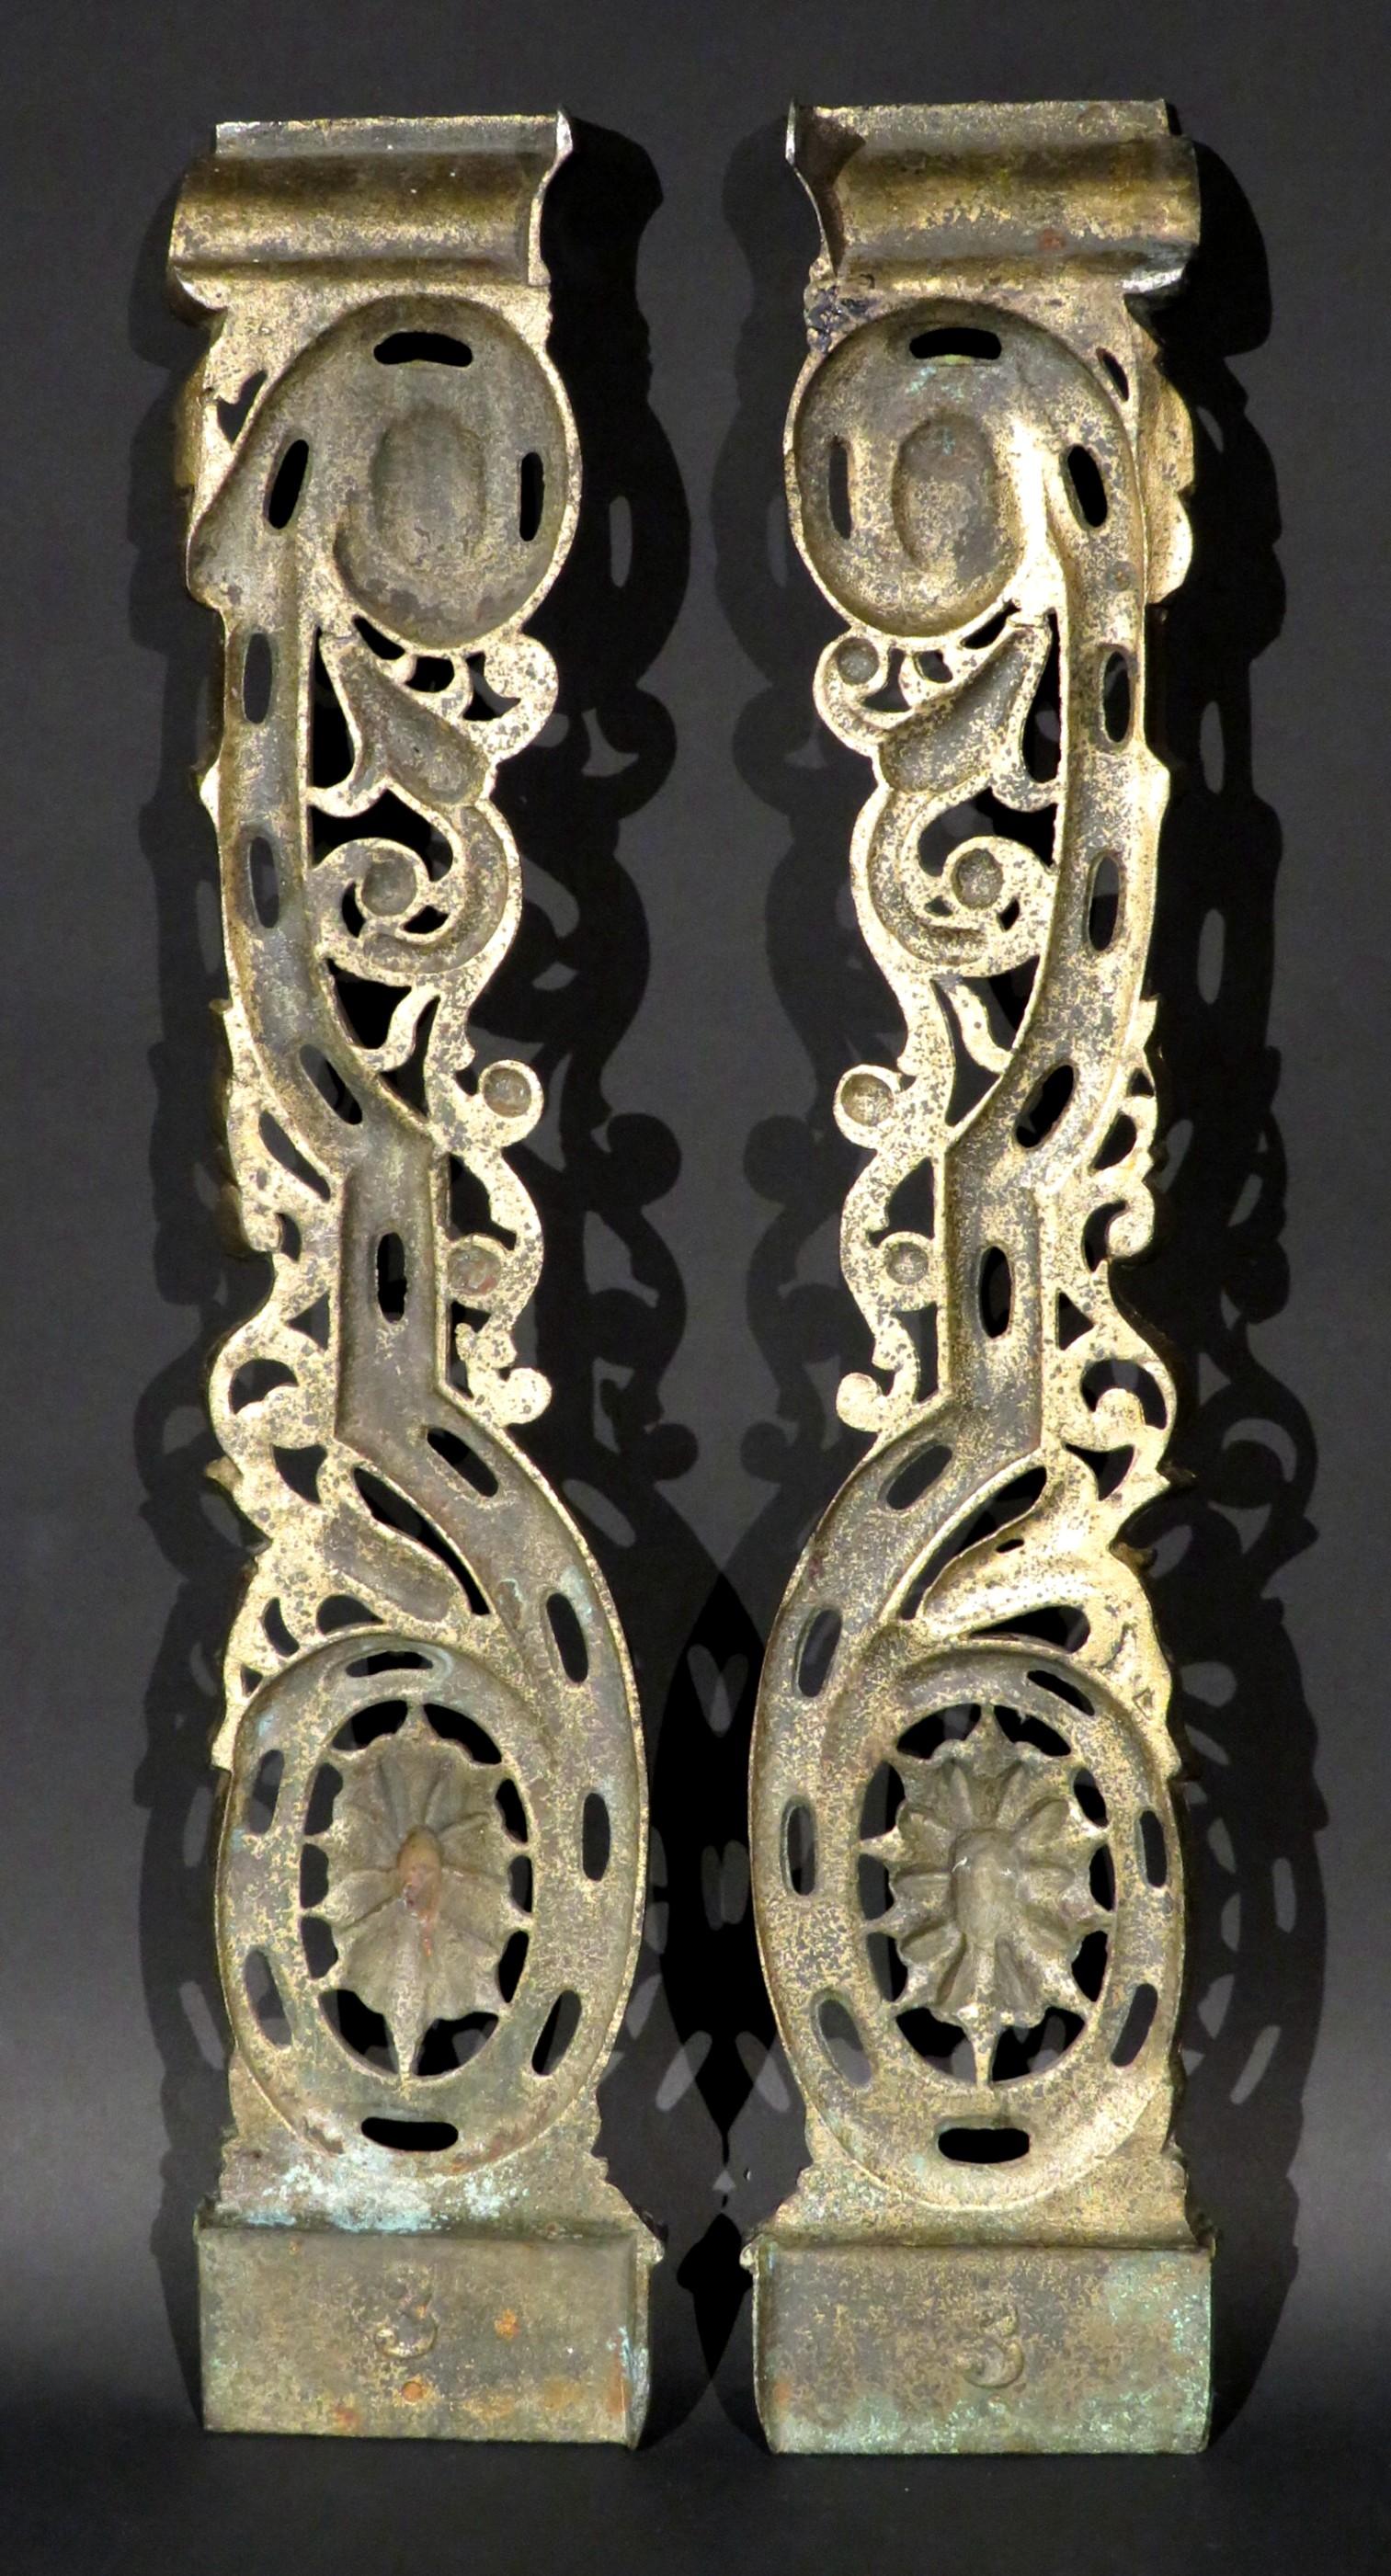 Pair of 19th Century Neoclassical Inspired Ormolu Architectural Elements In Good Condition For Sale In Ottawa, Ontario